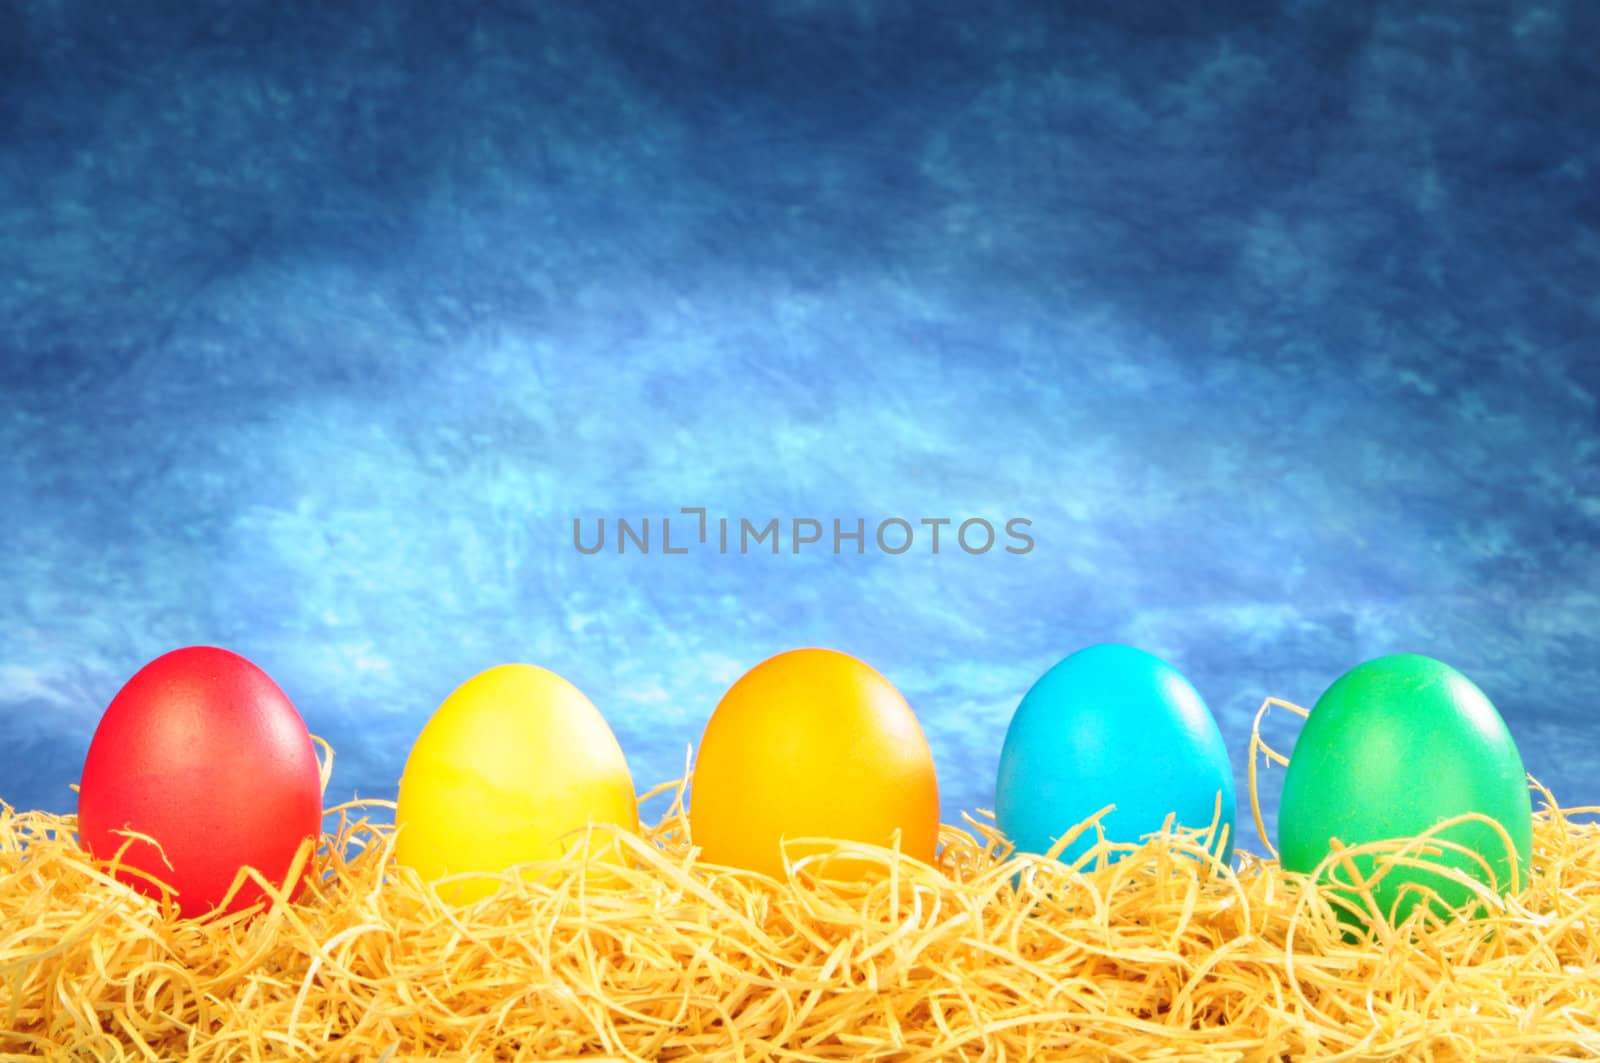 five painted eggs on a straw on a blue background by dyoma